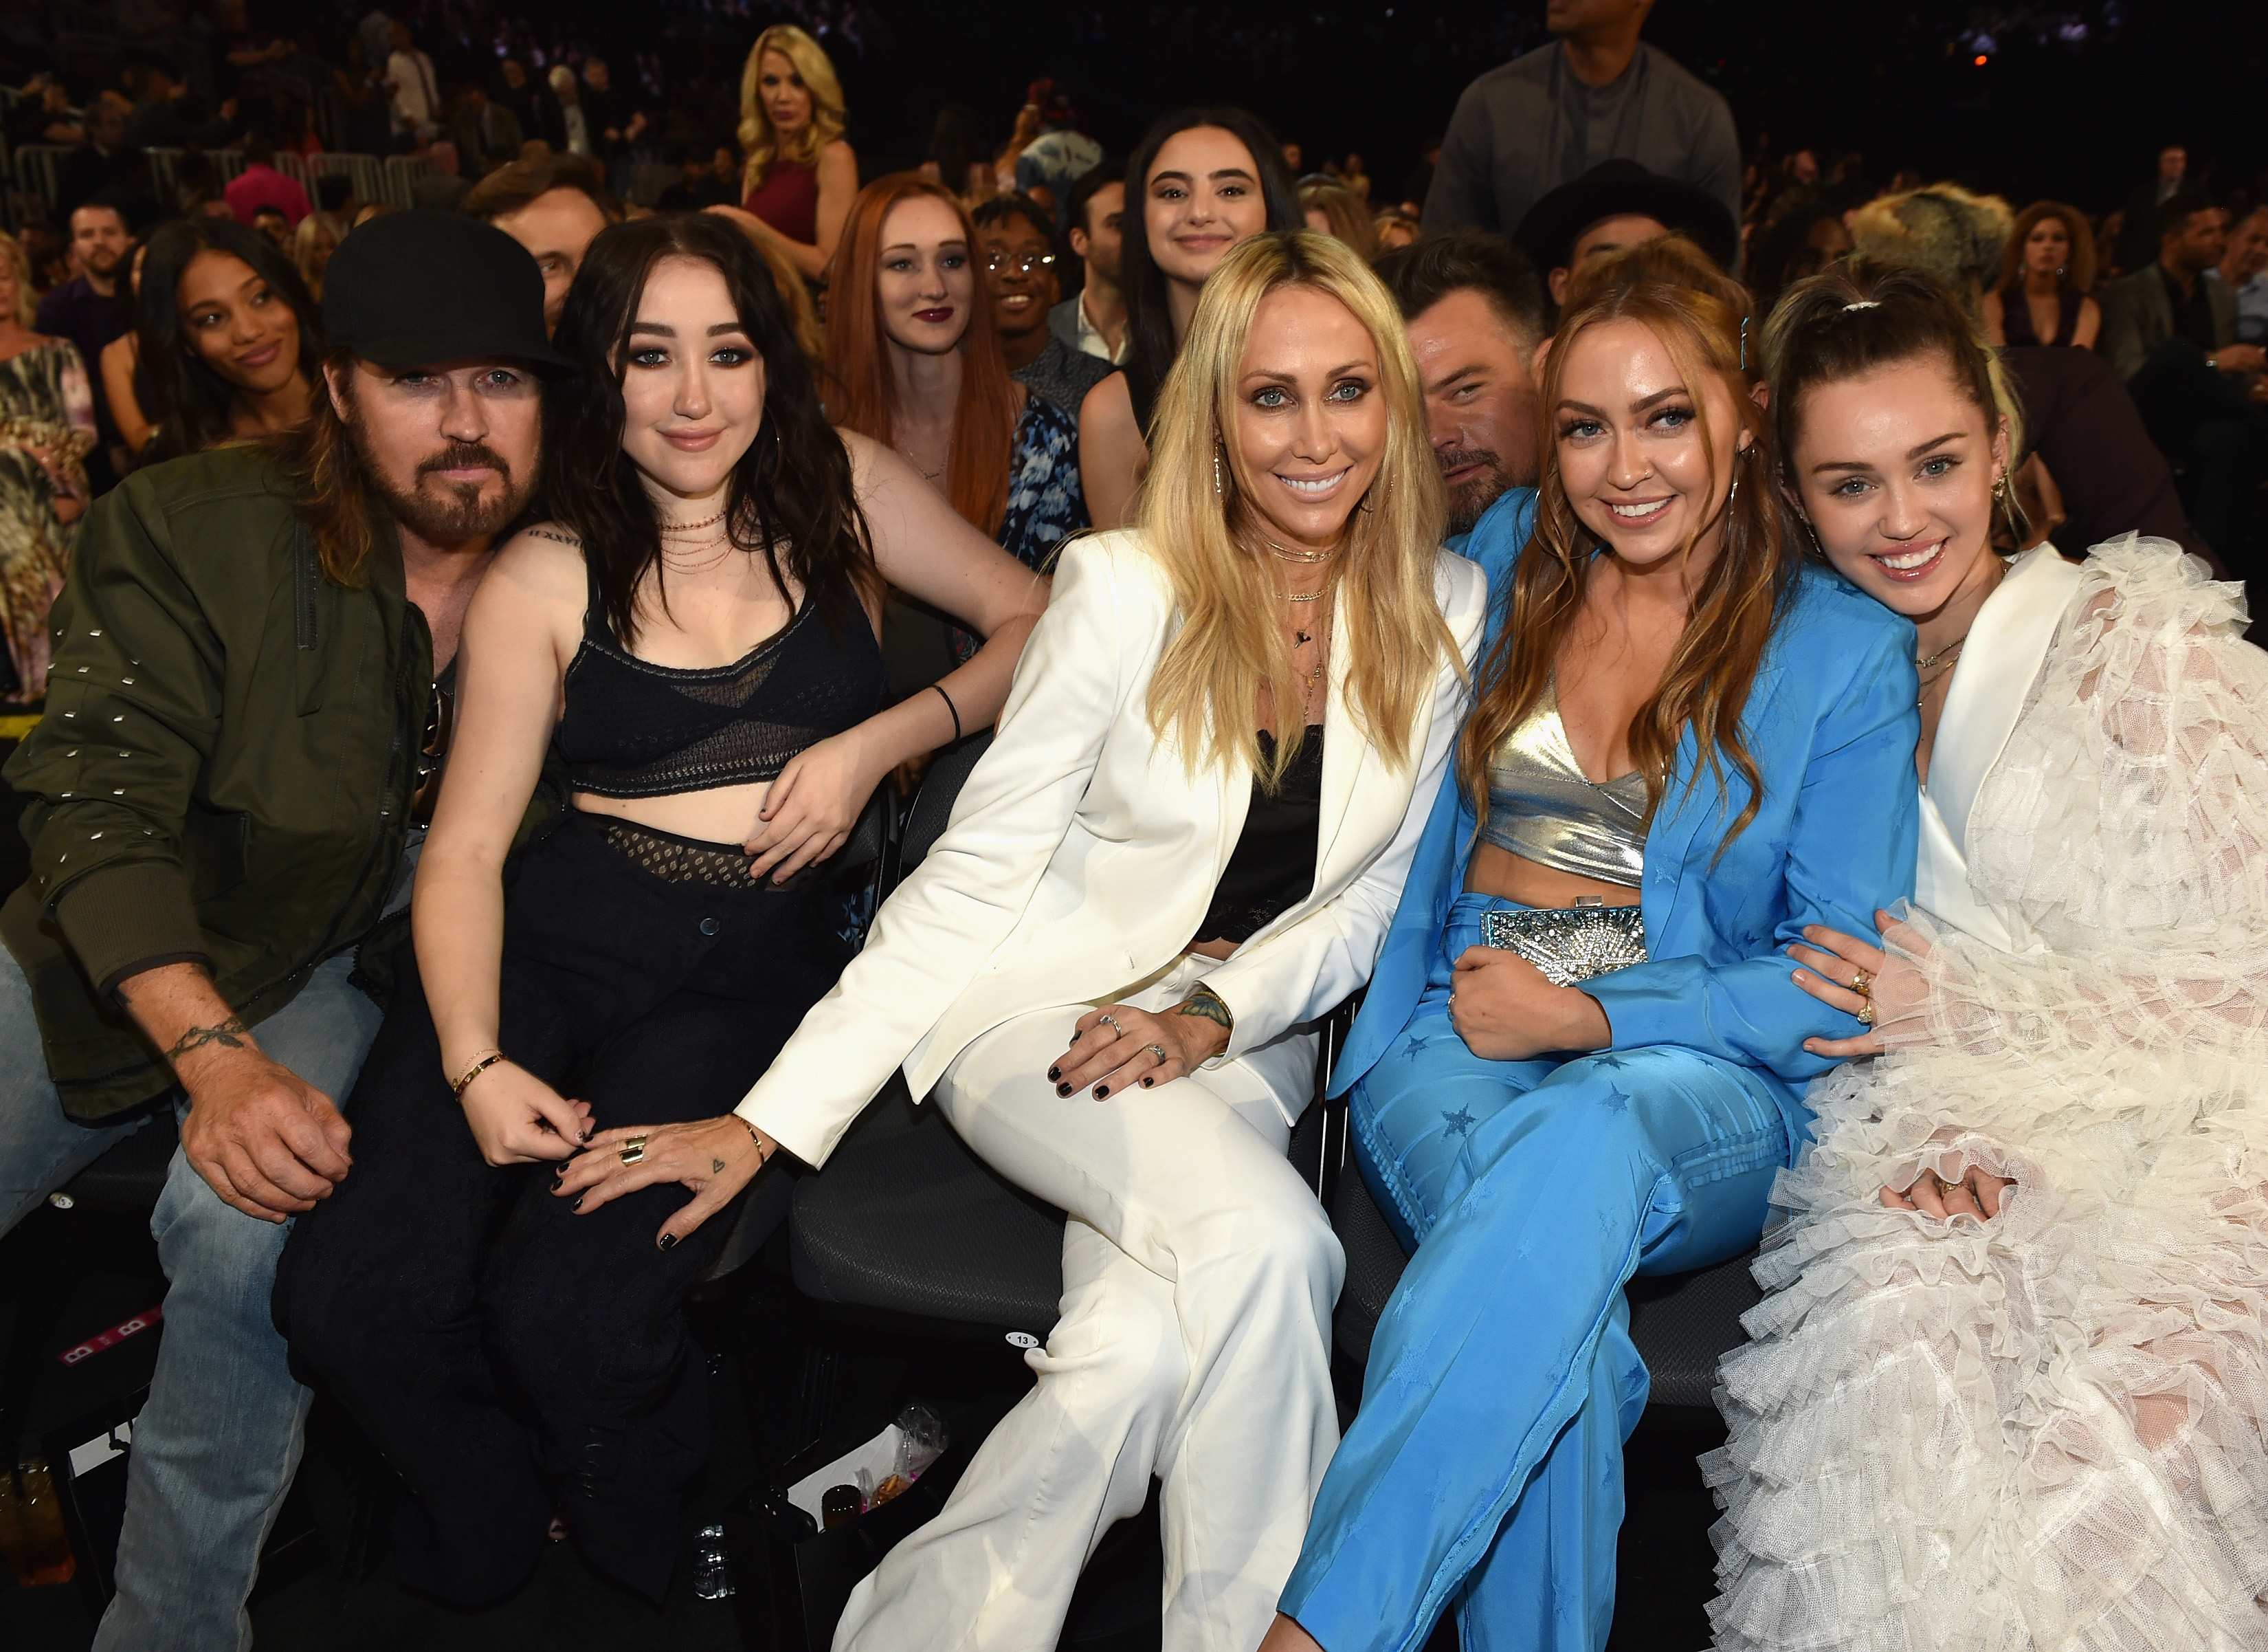 Billy Ray Cyrus and Noah Cyrus, Tish Cyrus, Brandi Cyrus and Miley Cyrus posed together for a group photo at an event in May  2017